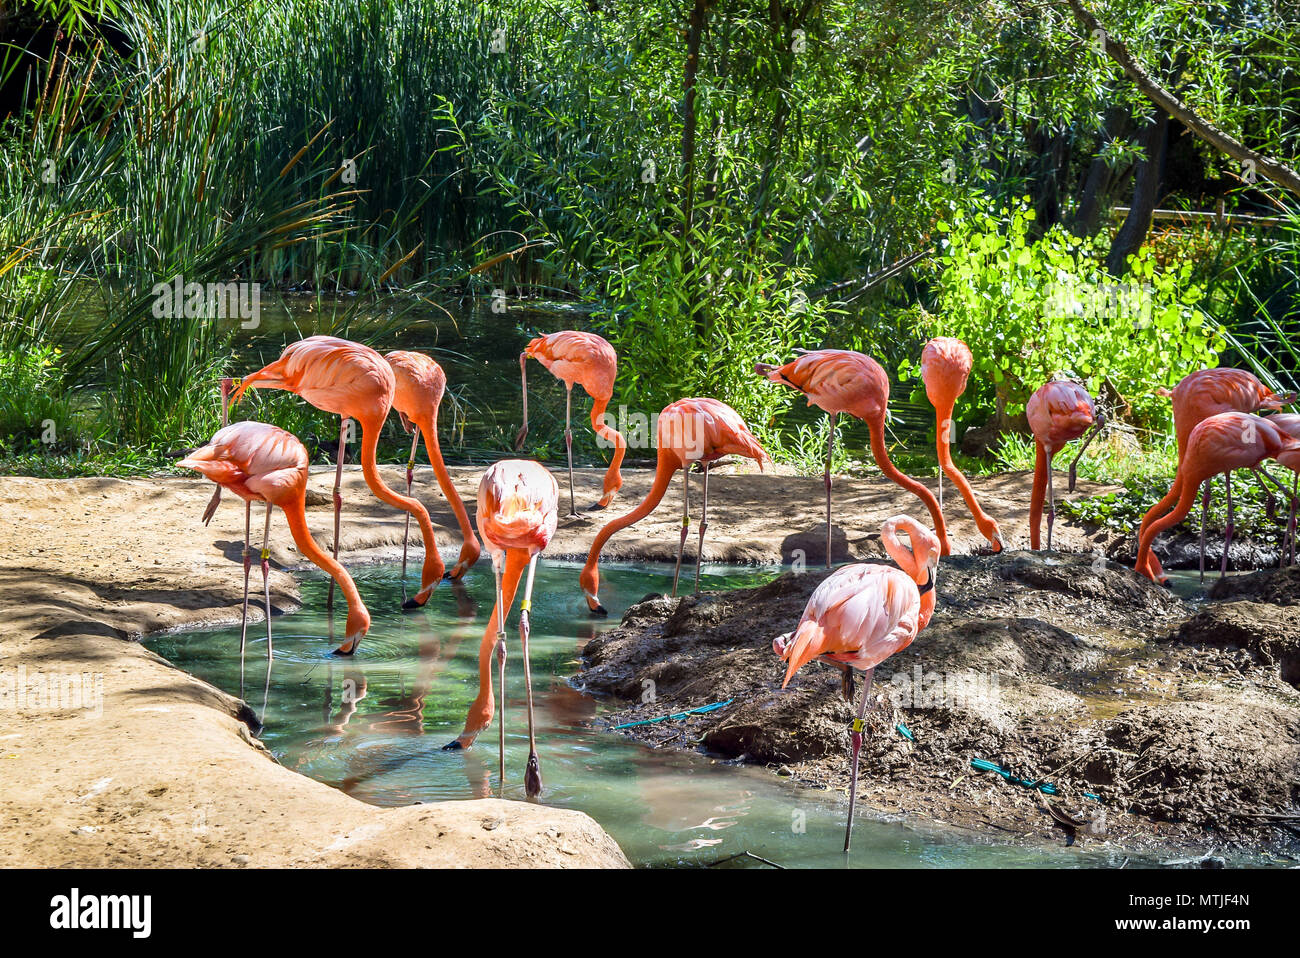 Beautiful red flamingo birds standing in water pond in the city zoo. Stock Photo